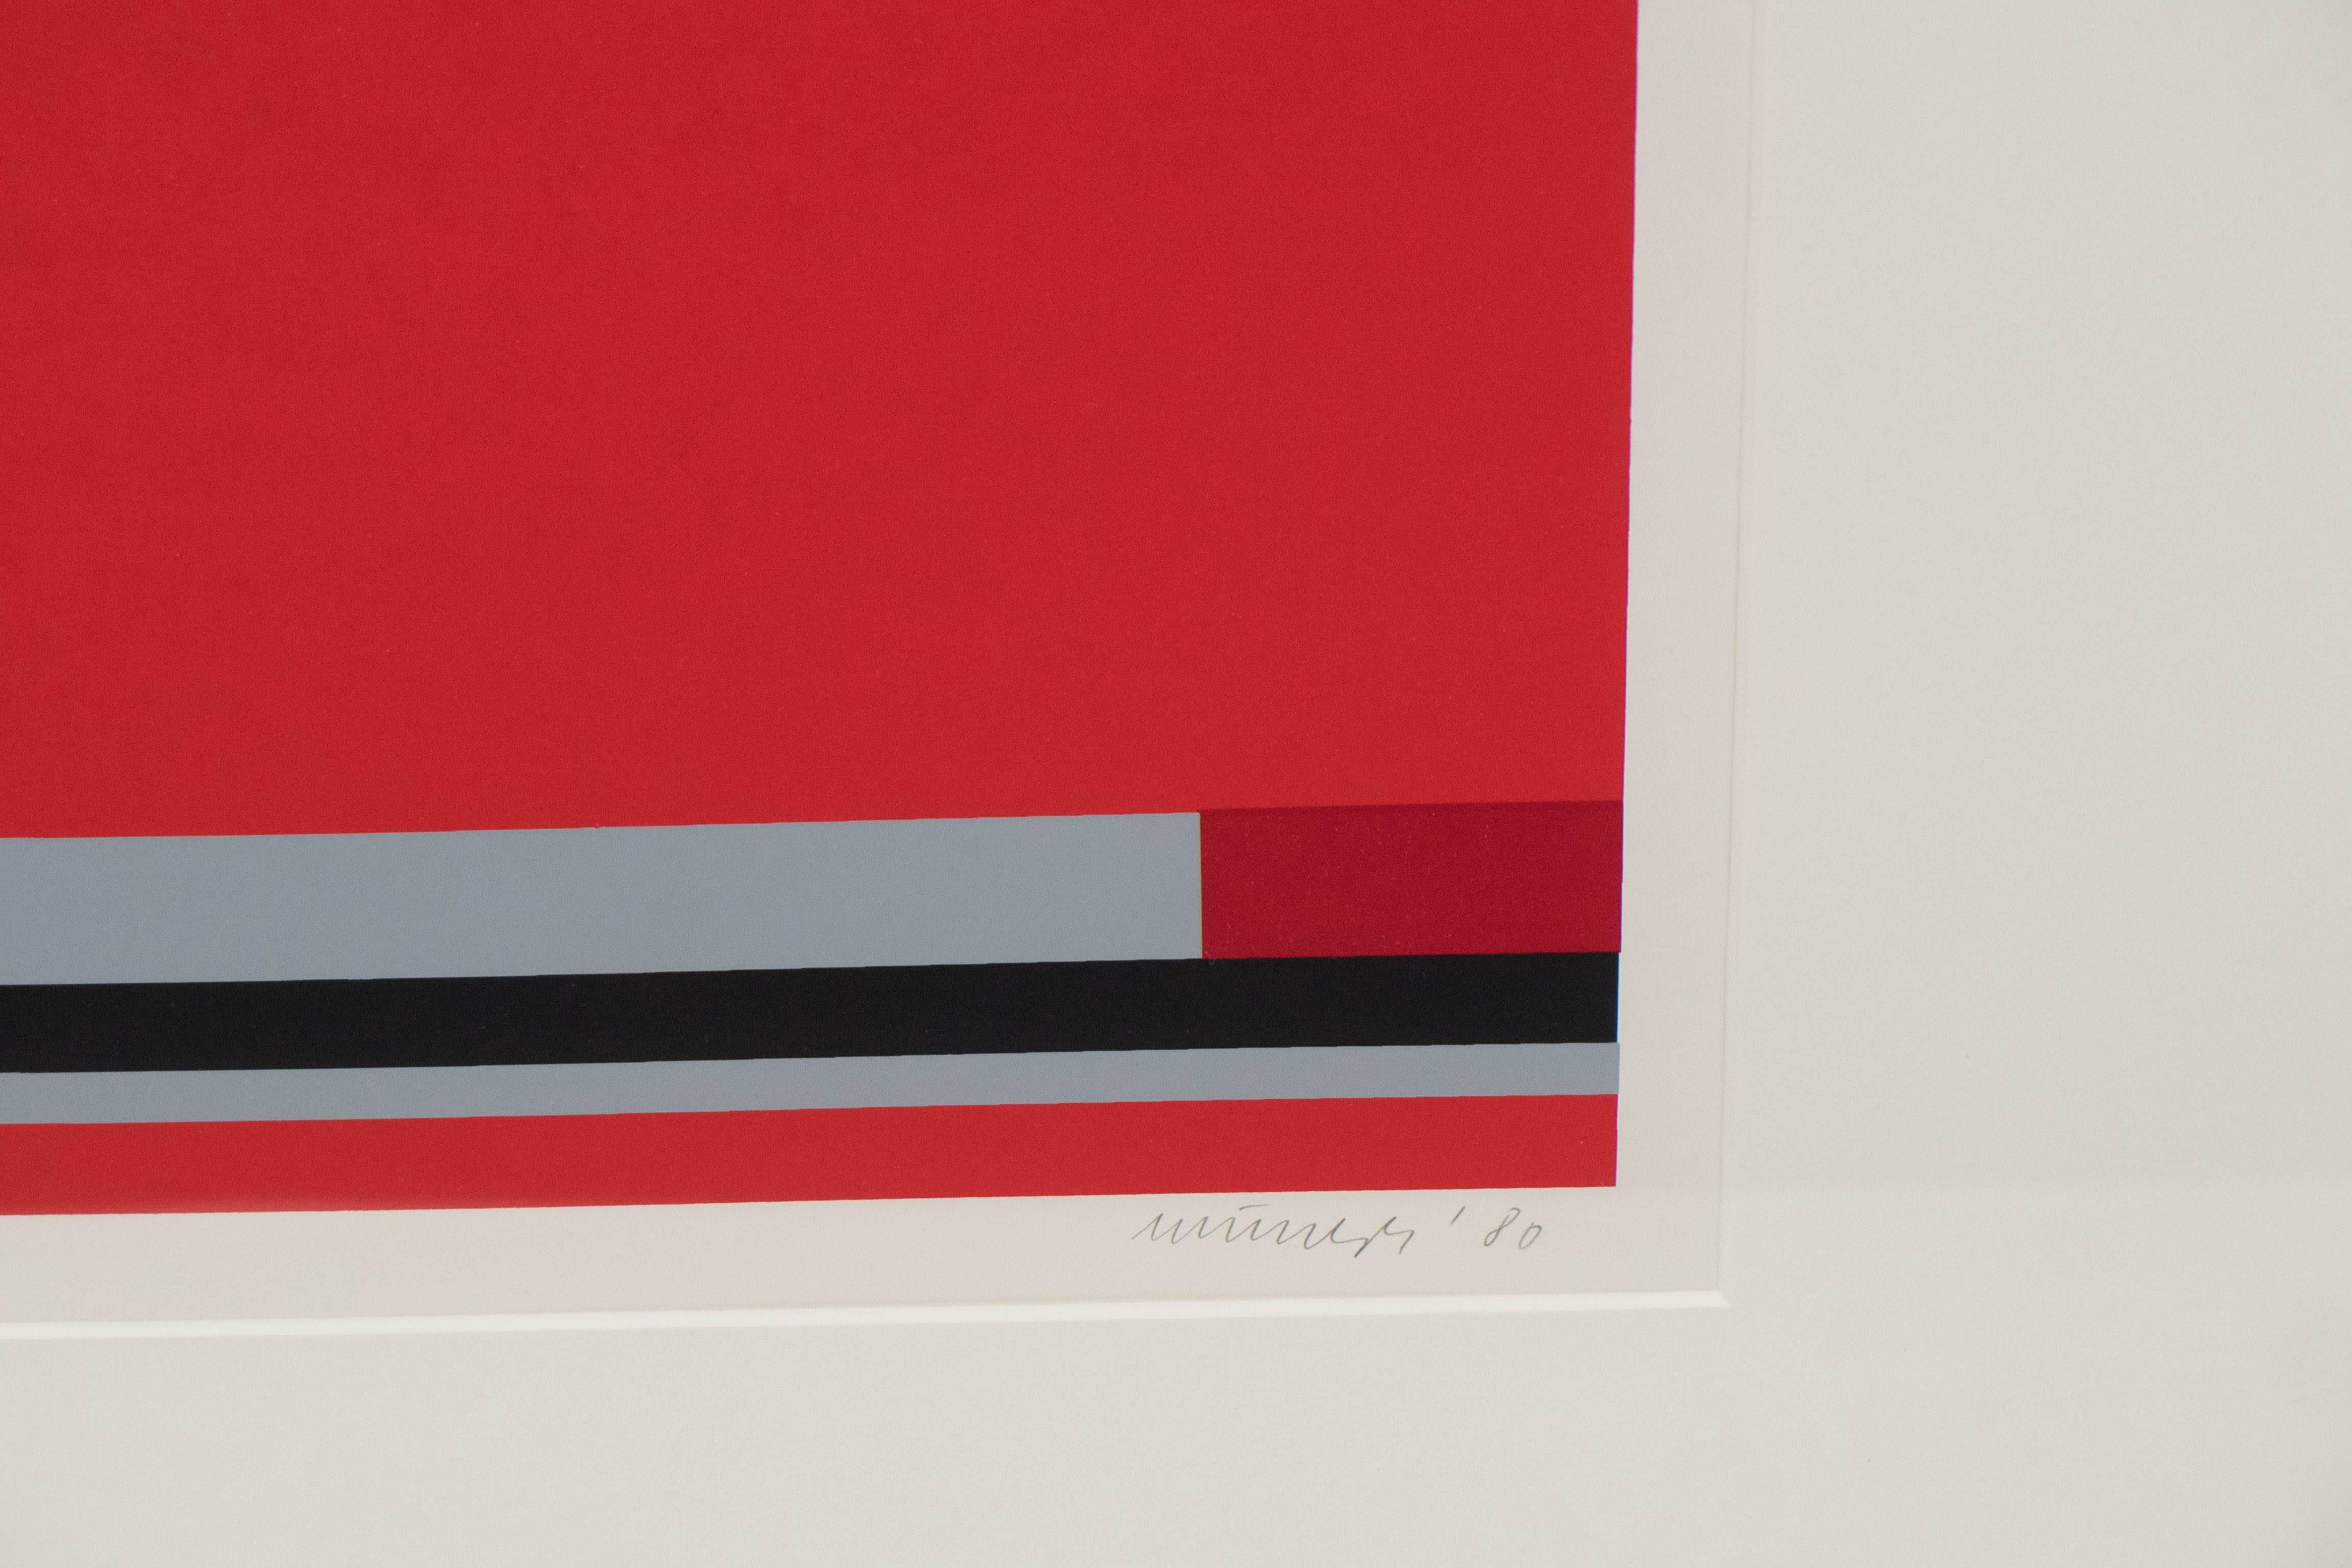 Modern Jo Niemeyer, Geometric Composition in Red, Grey & Black, Signed & Dated